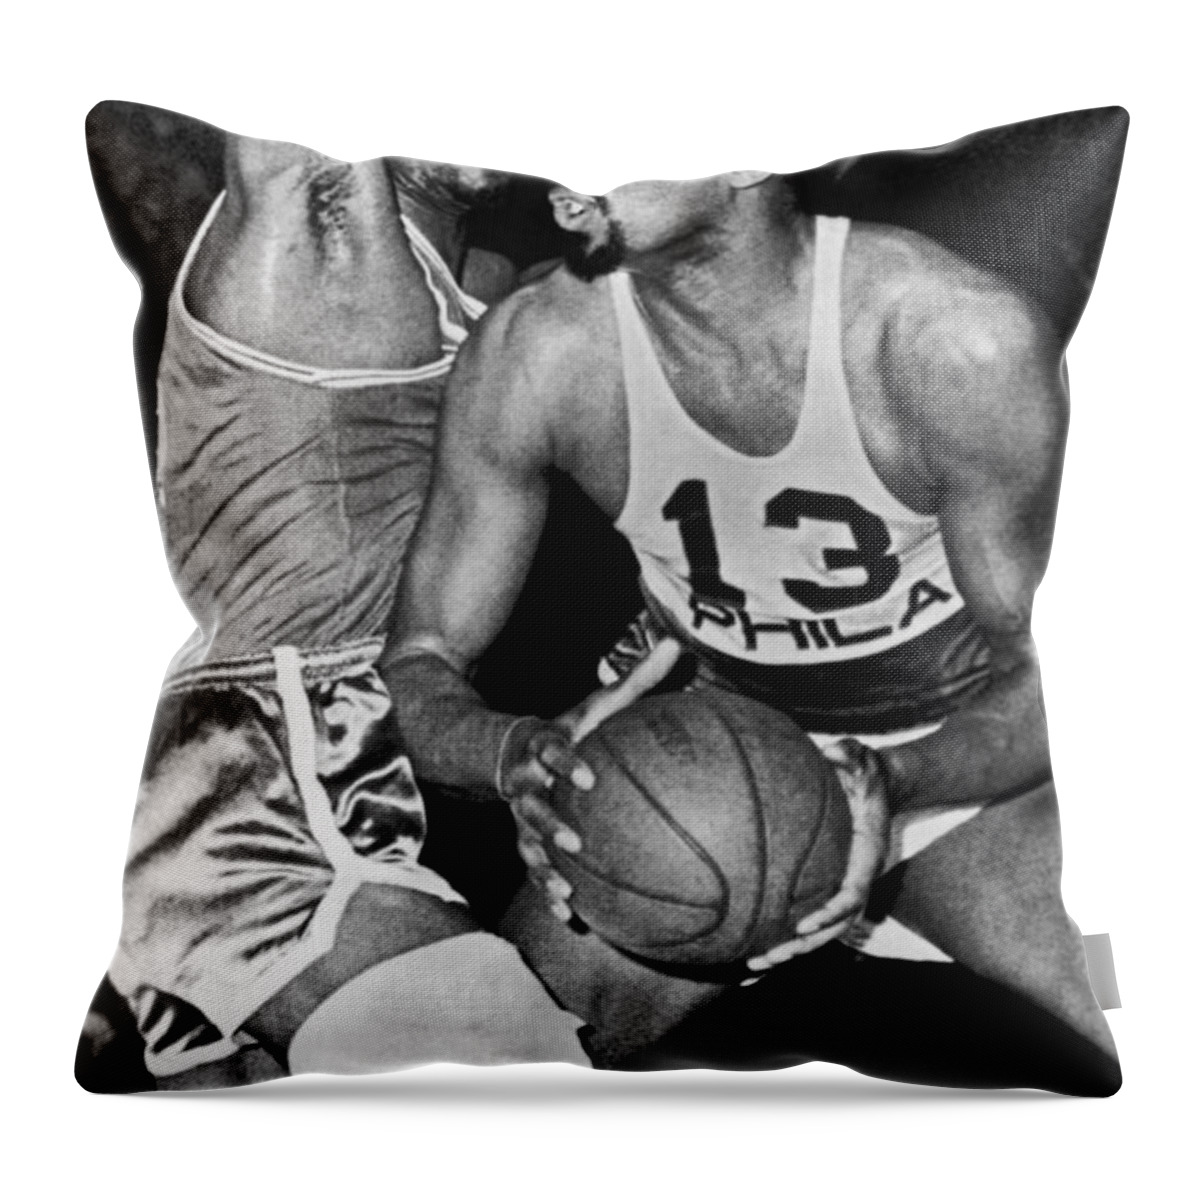 1960s Throw Pillow featuring the photograph Chamberlain Versus Russell by Underwood Archives